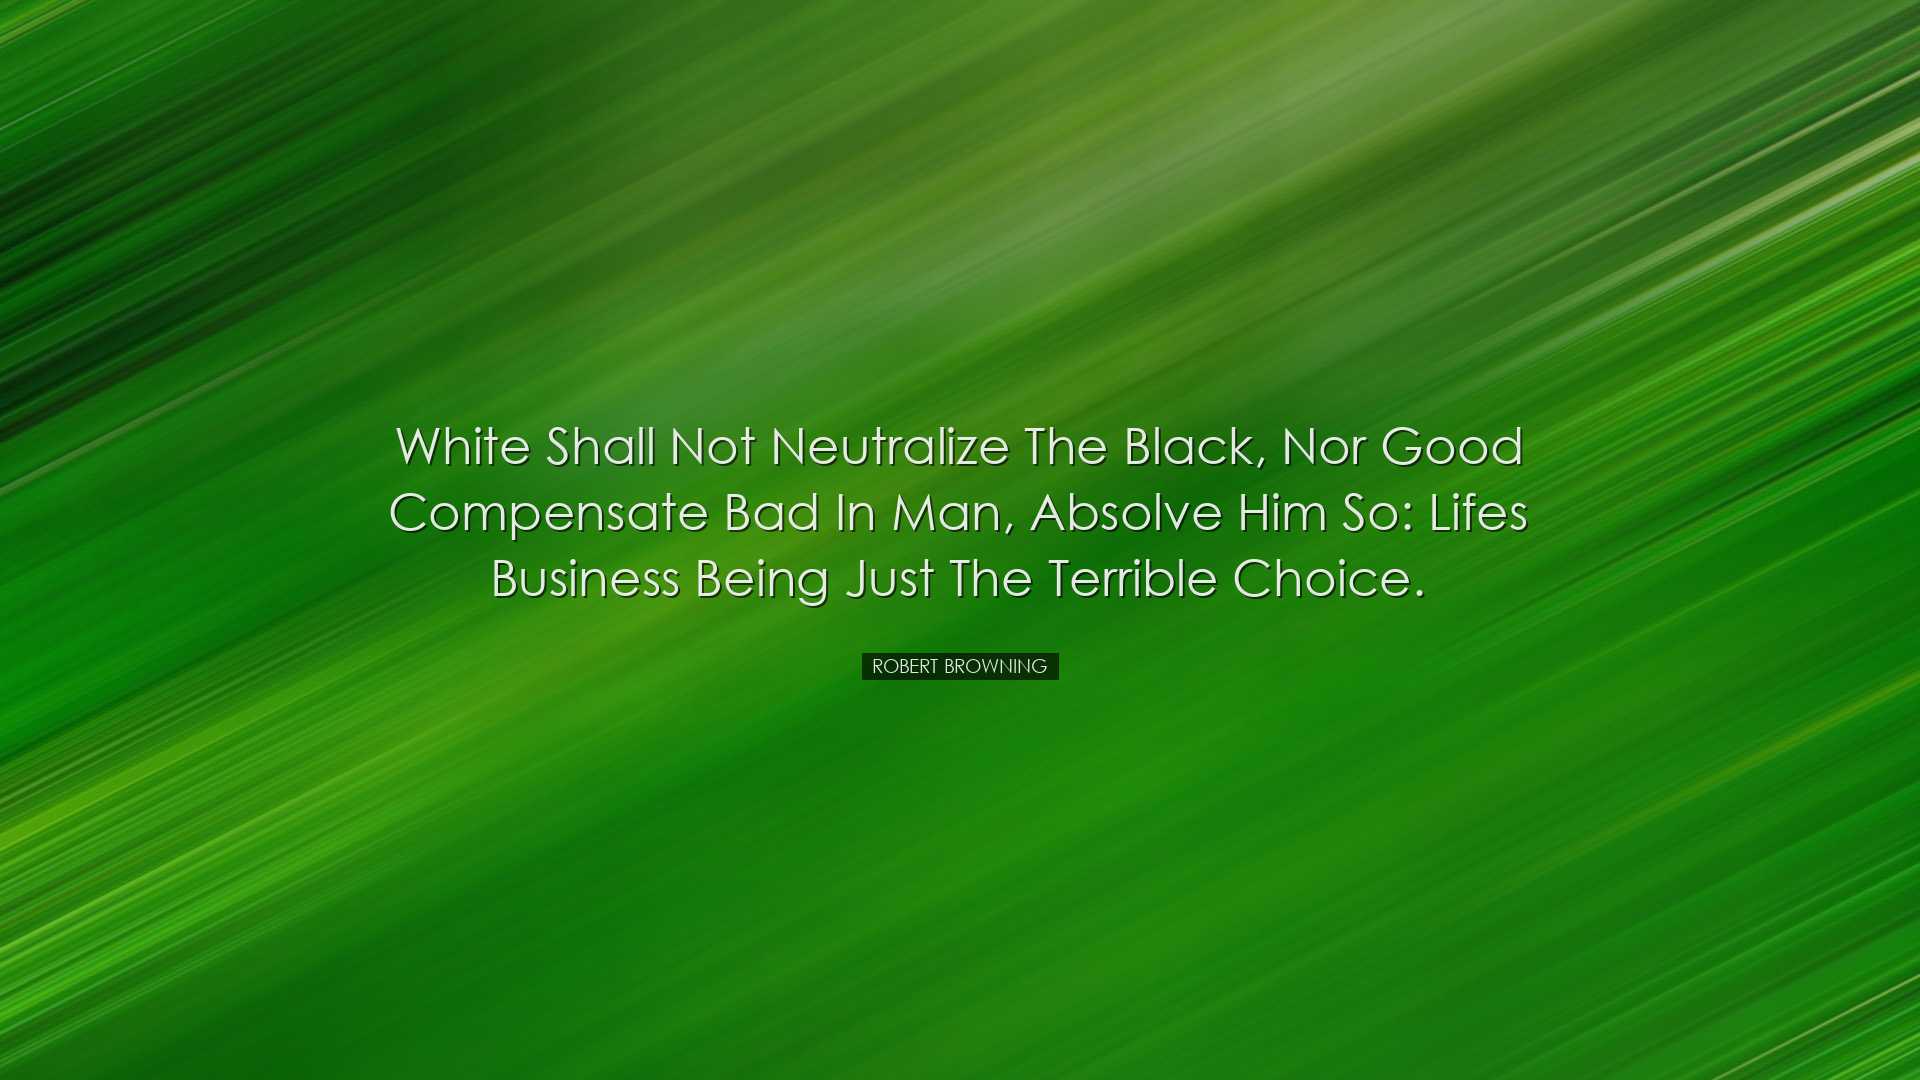 White shall not neutralize the black, nor good compensate bad in m